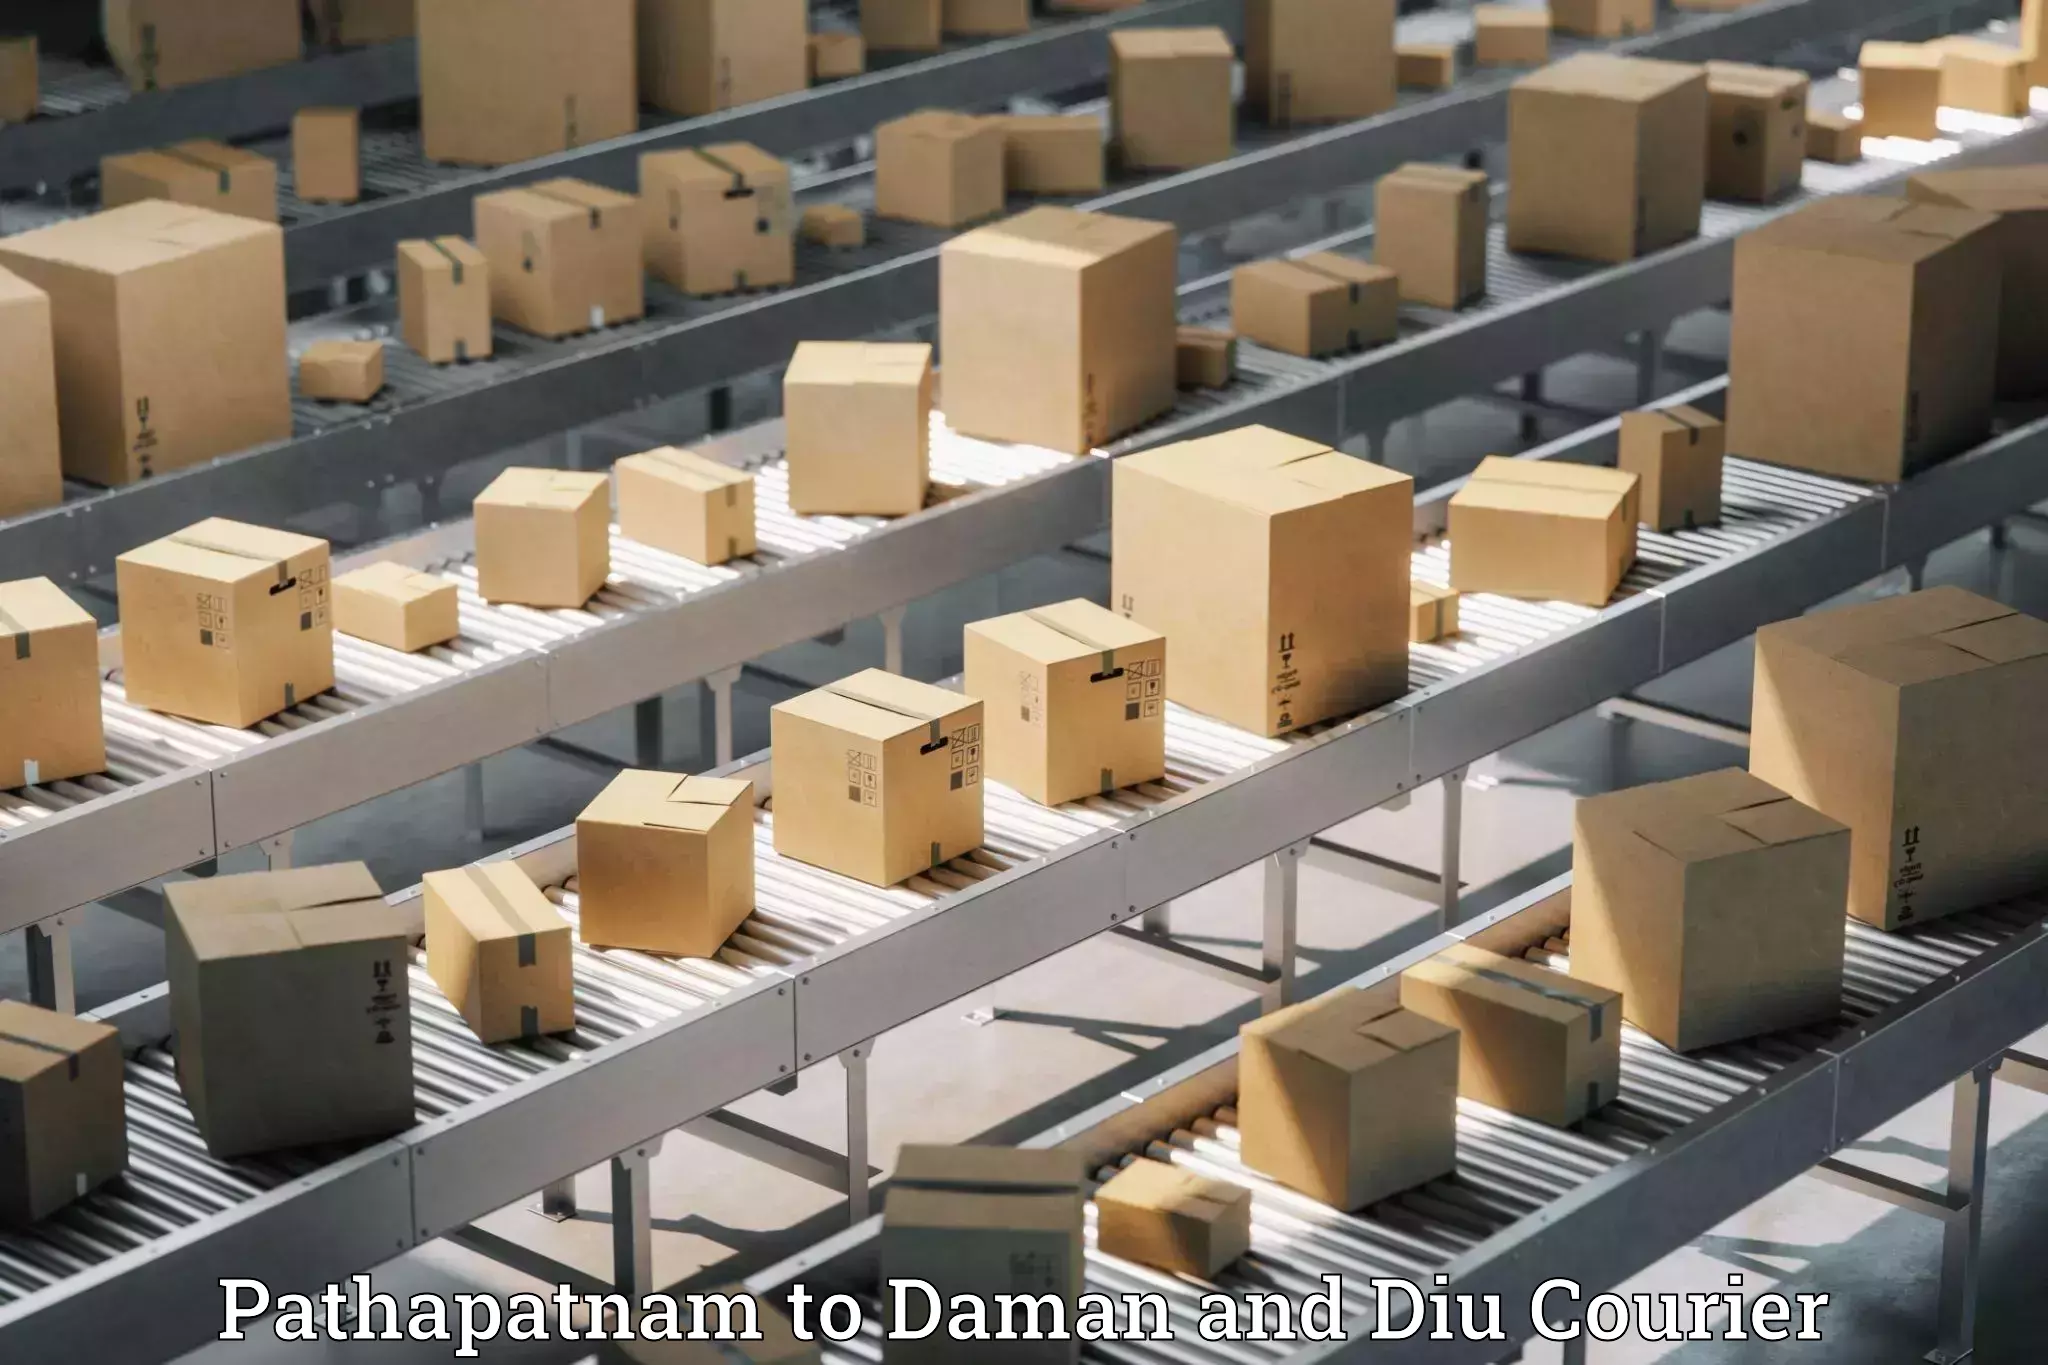 Reliable shipping partners Pathapatnam to Daman